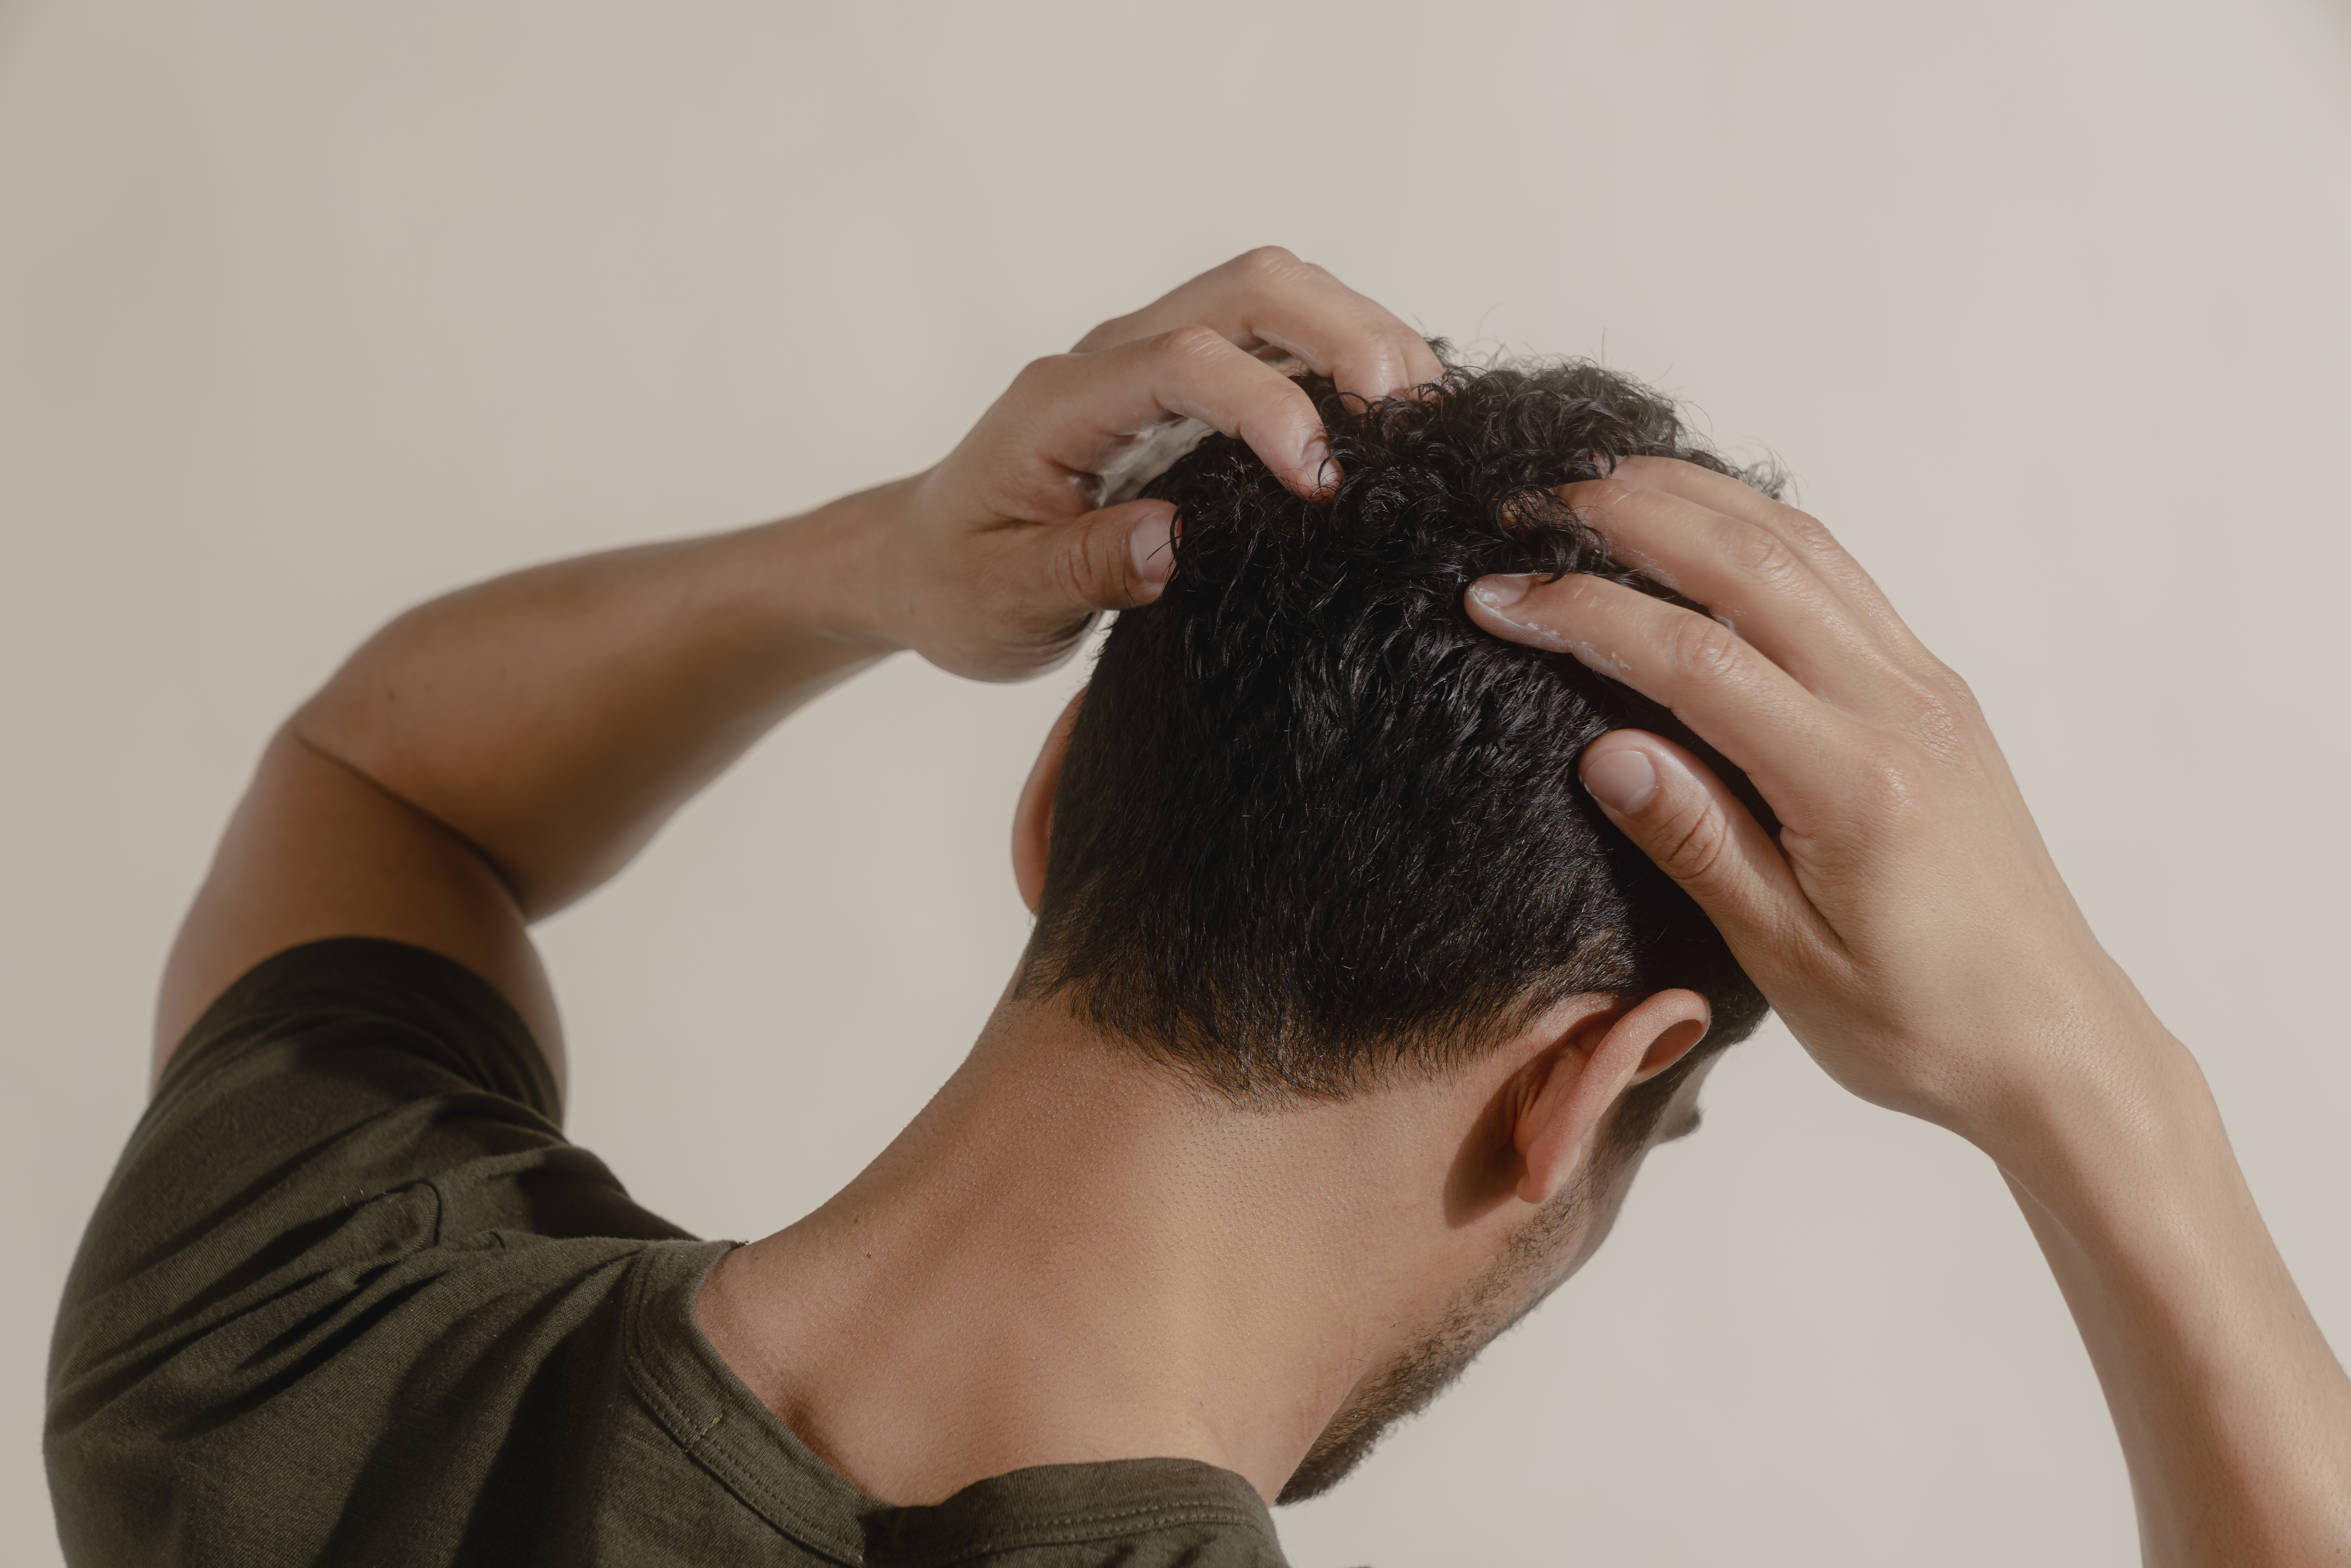 How Much Hair Loss is Normal for a Teenage Male